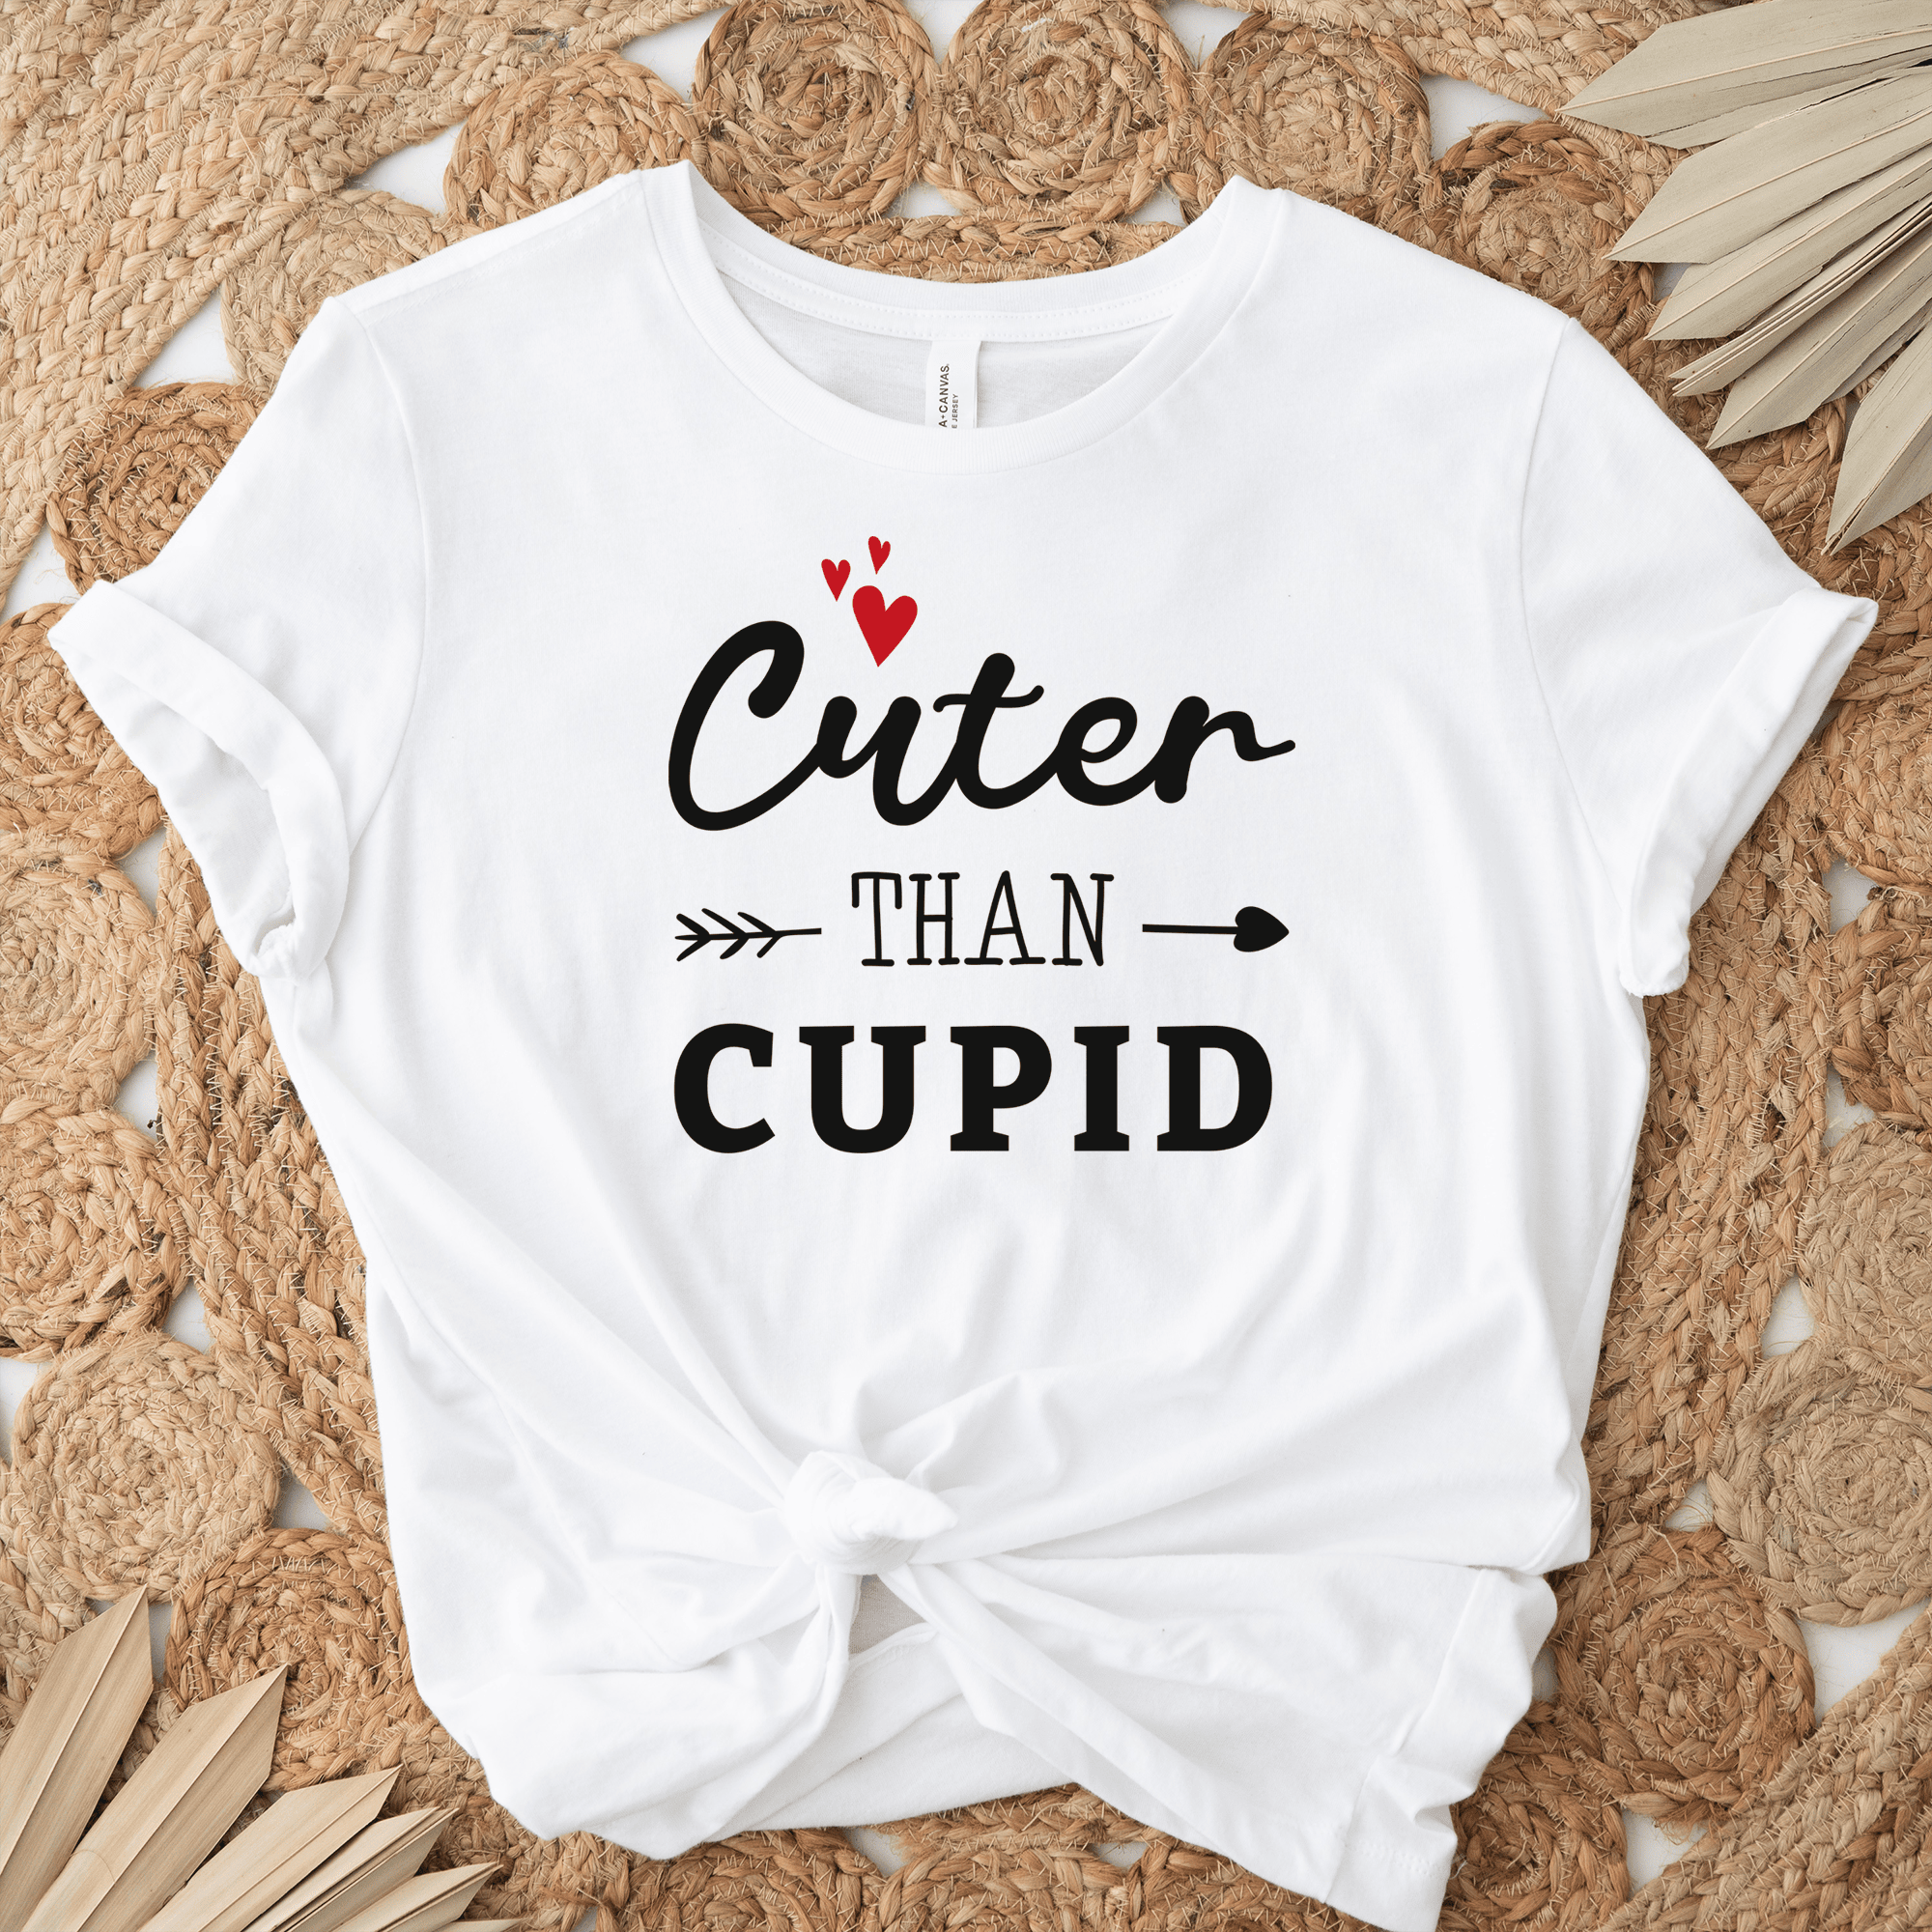 White Womens T-Shirt With Cuter Than Cupid Design